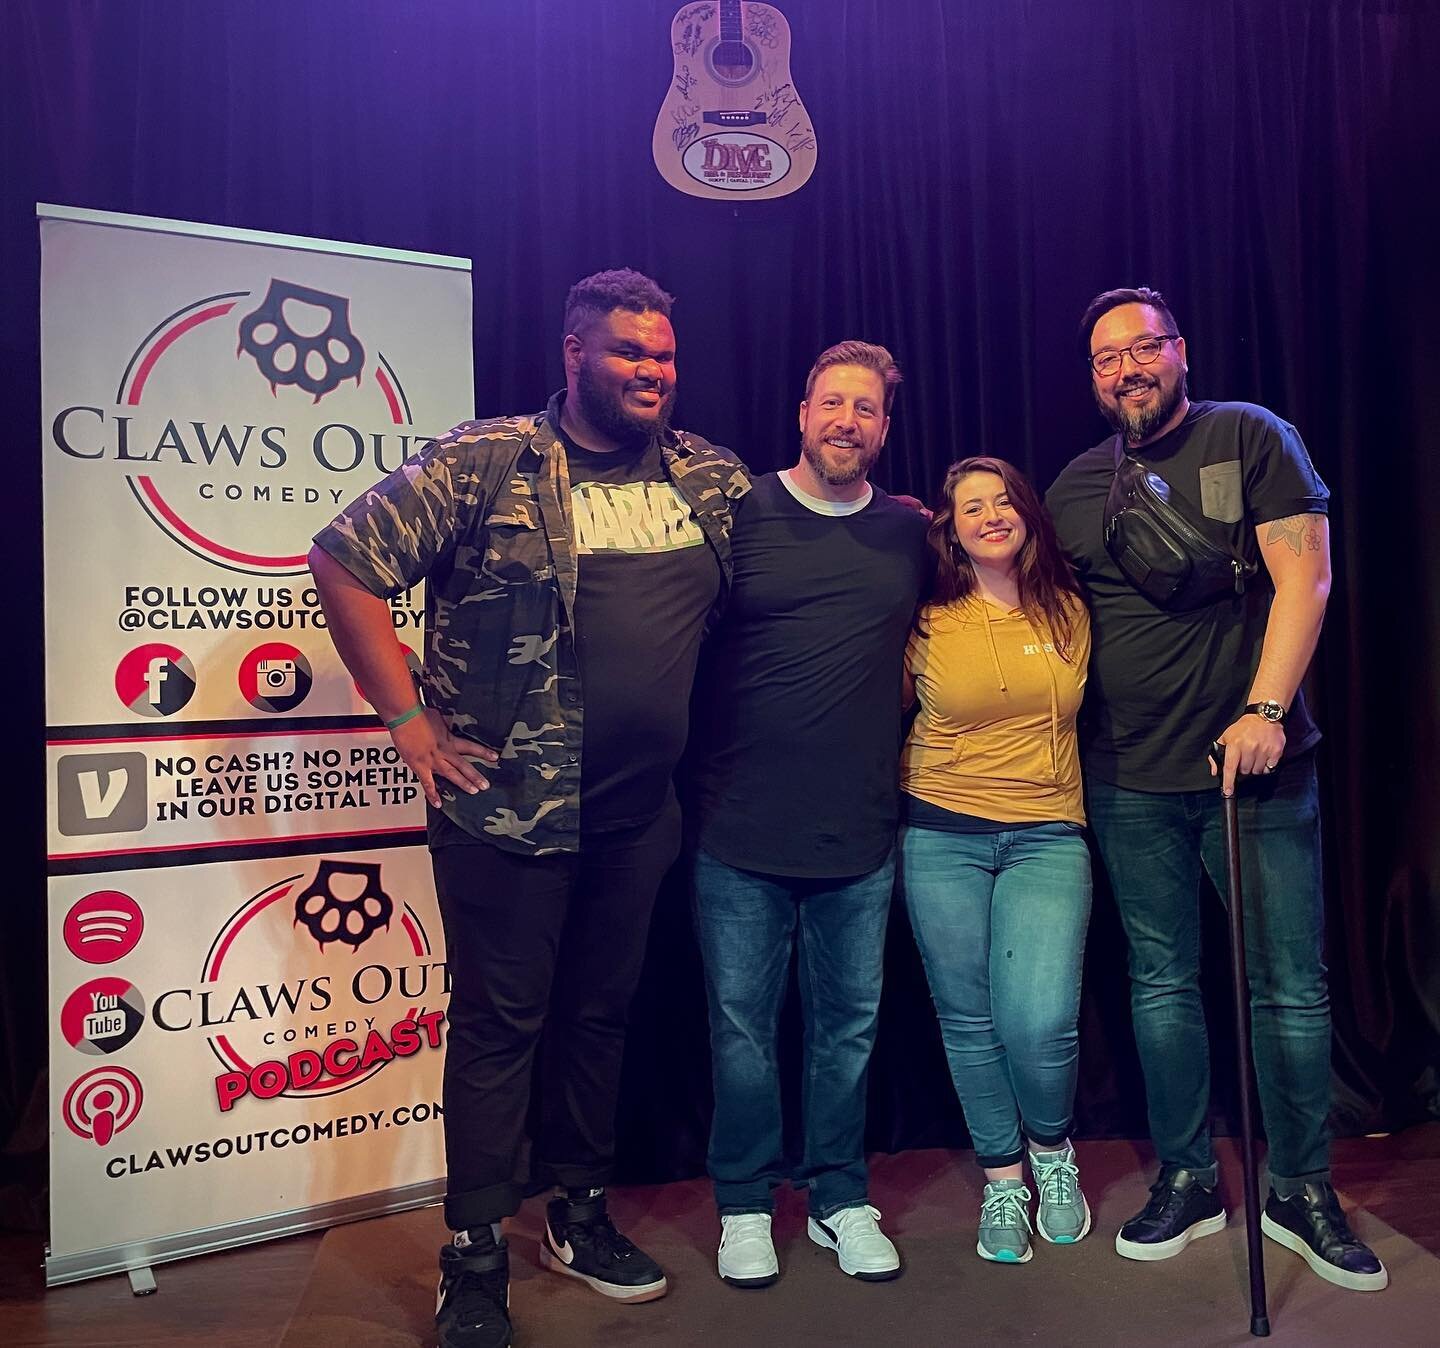 Another great album recording at @thedivedenton! Can&rsquo;t wait for you all to hear &ldquo;APOLOGETIC&rdquo; by Steve Gammill.

Visit clawsoutcomedy.com to get tickets for upcoming shows and to learn more about our signed artists! 🎤